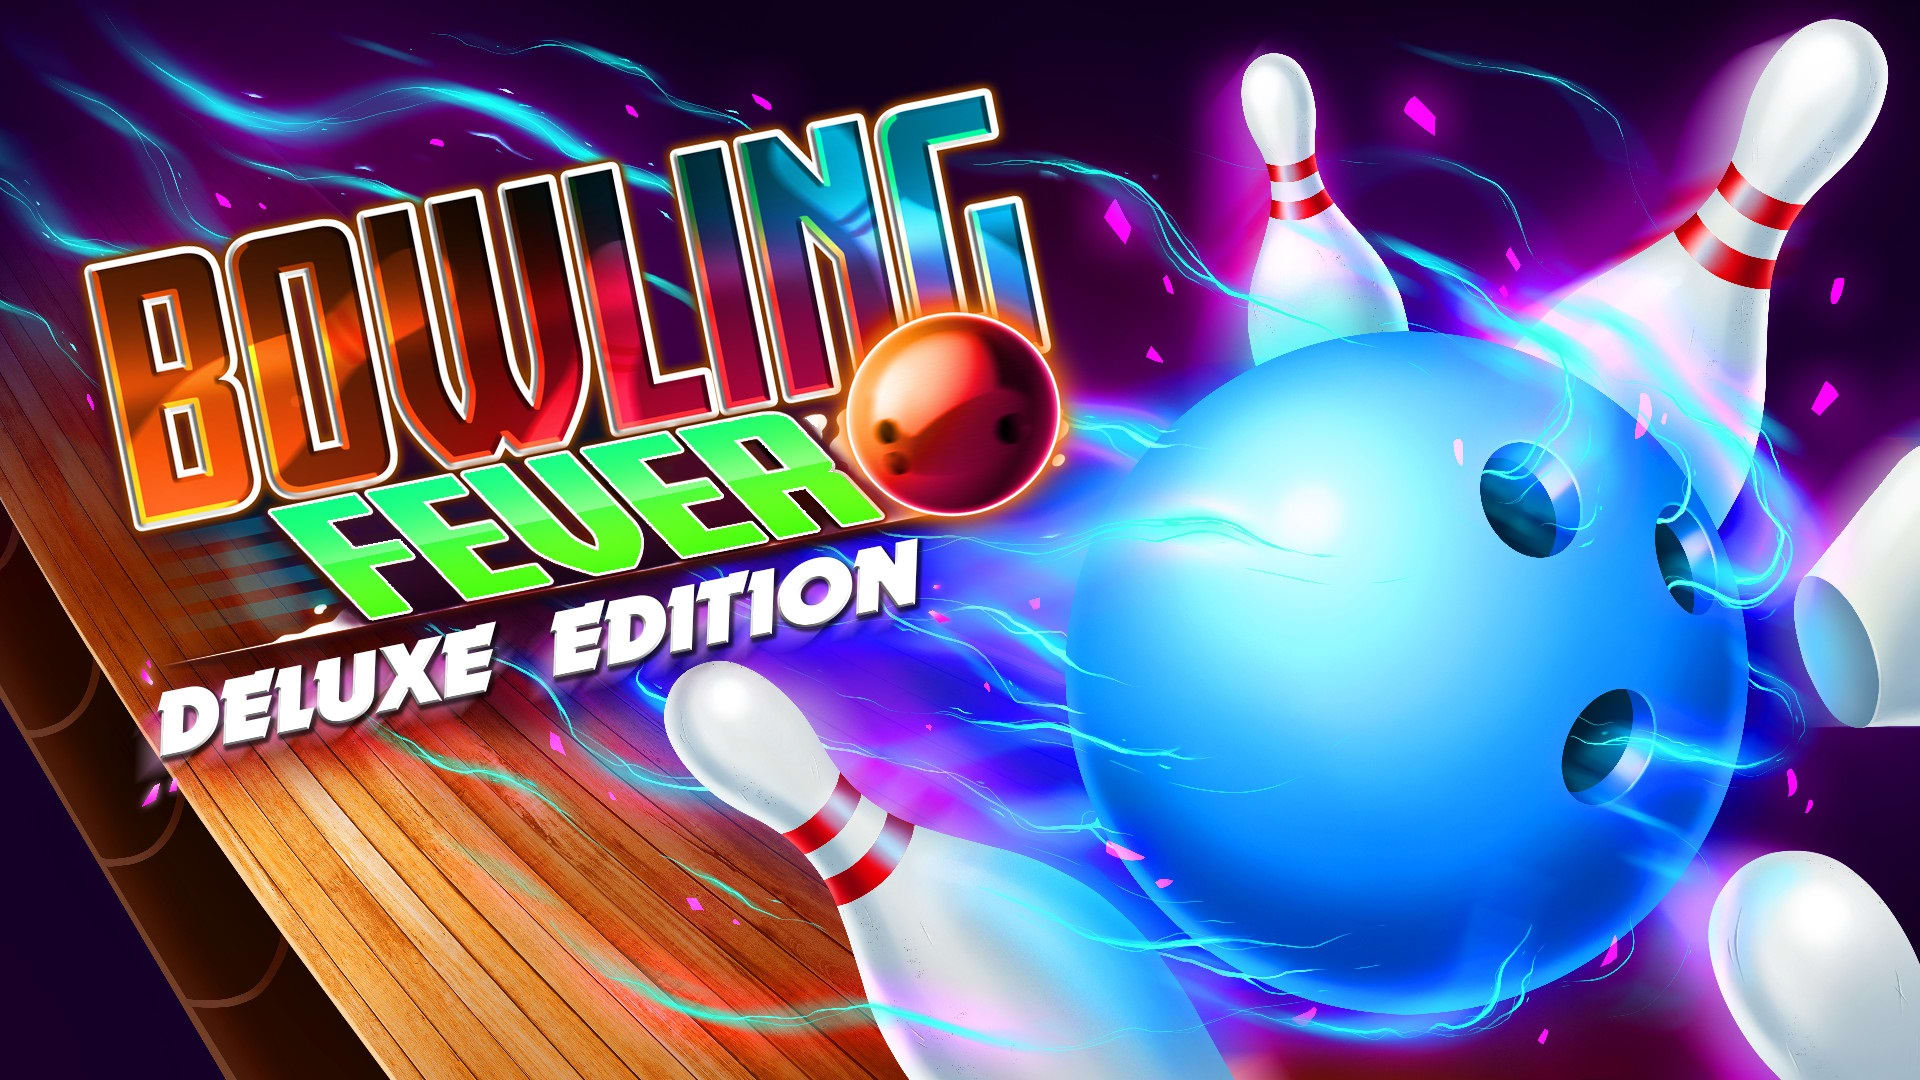 Bowling Fever Deluxe Edition 1